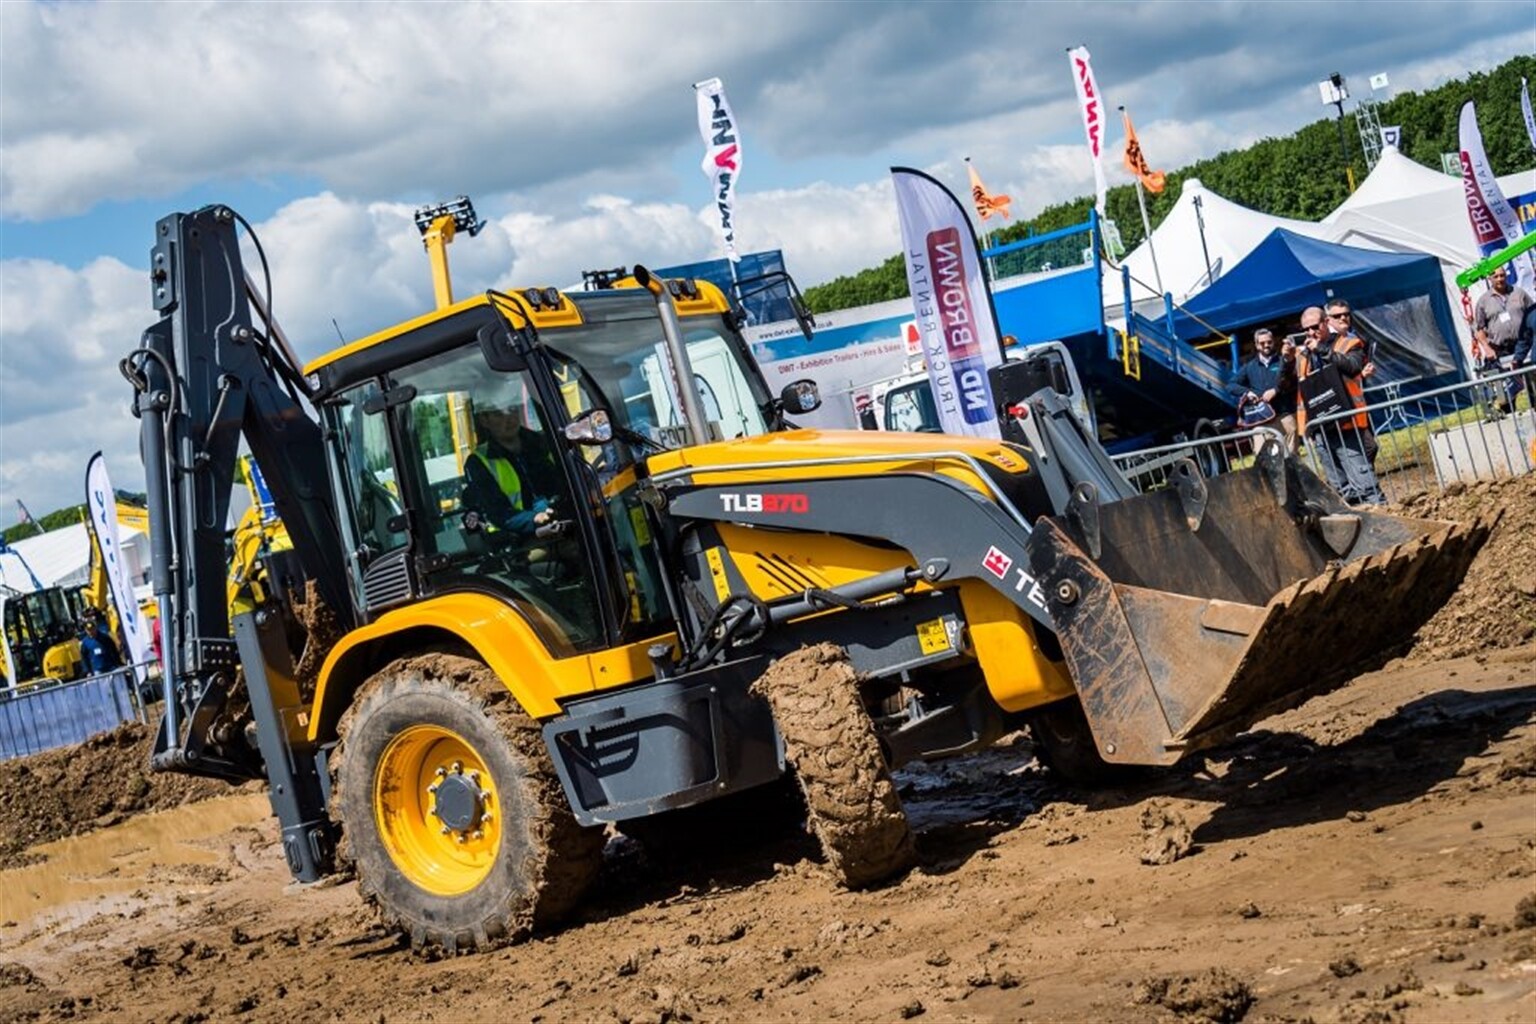 Plantworx and Railworx on track for the 2019 event